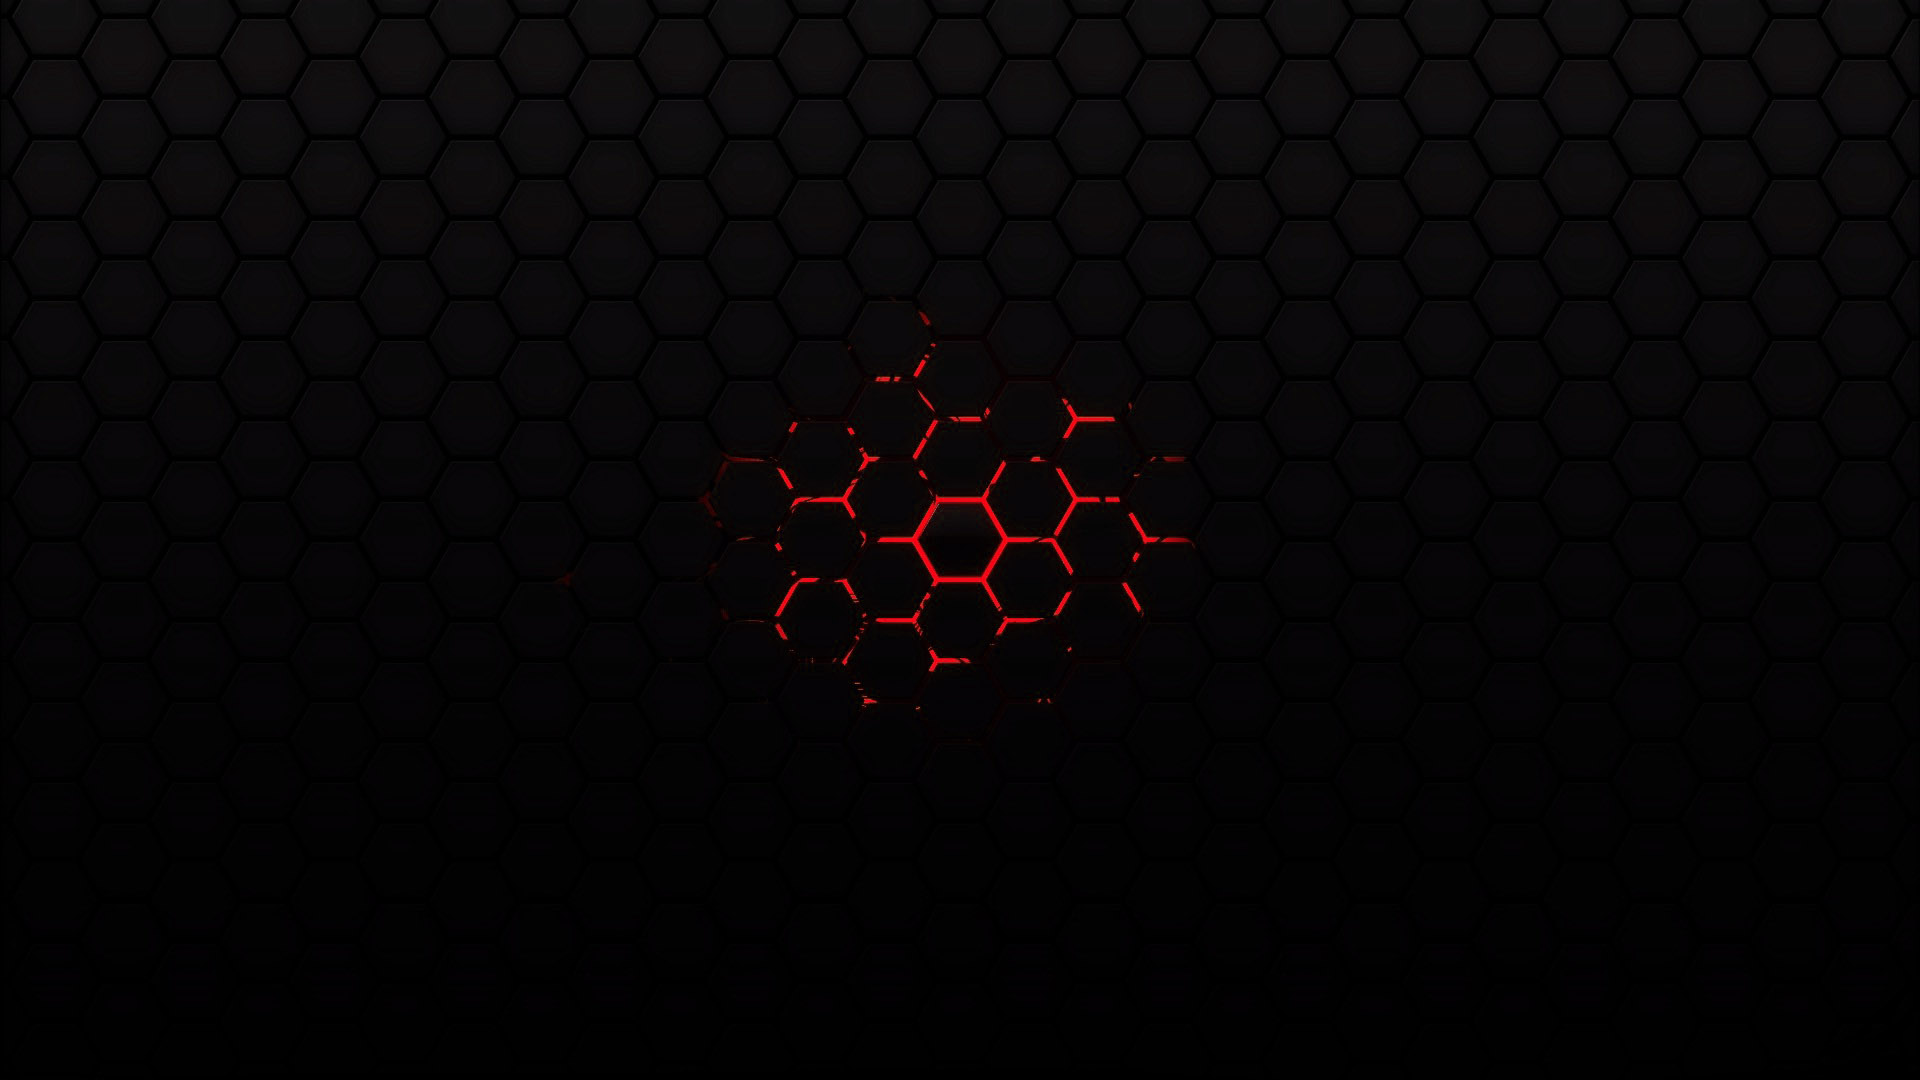 Hd black and red wallpaper